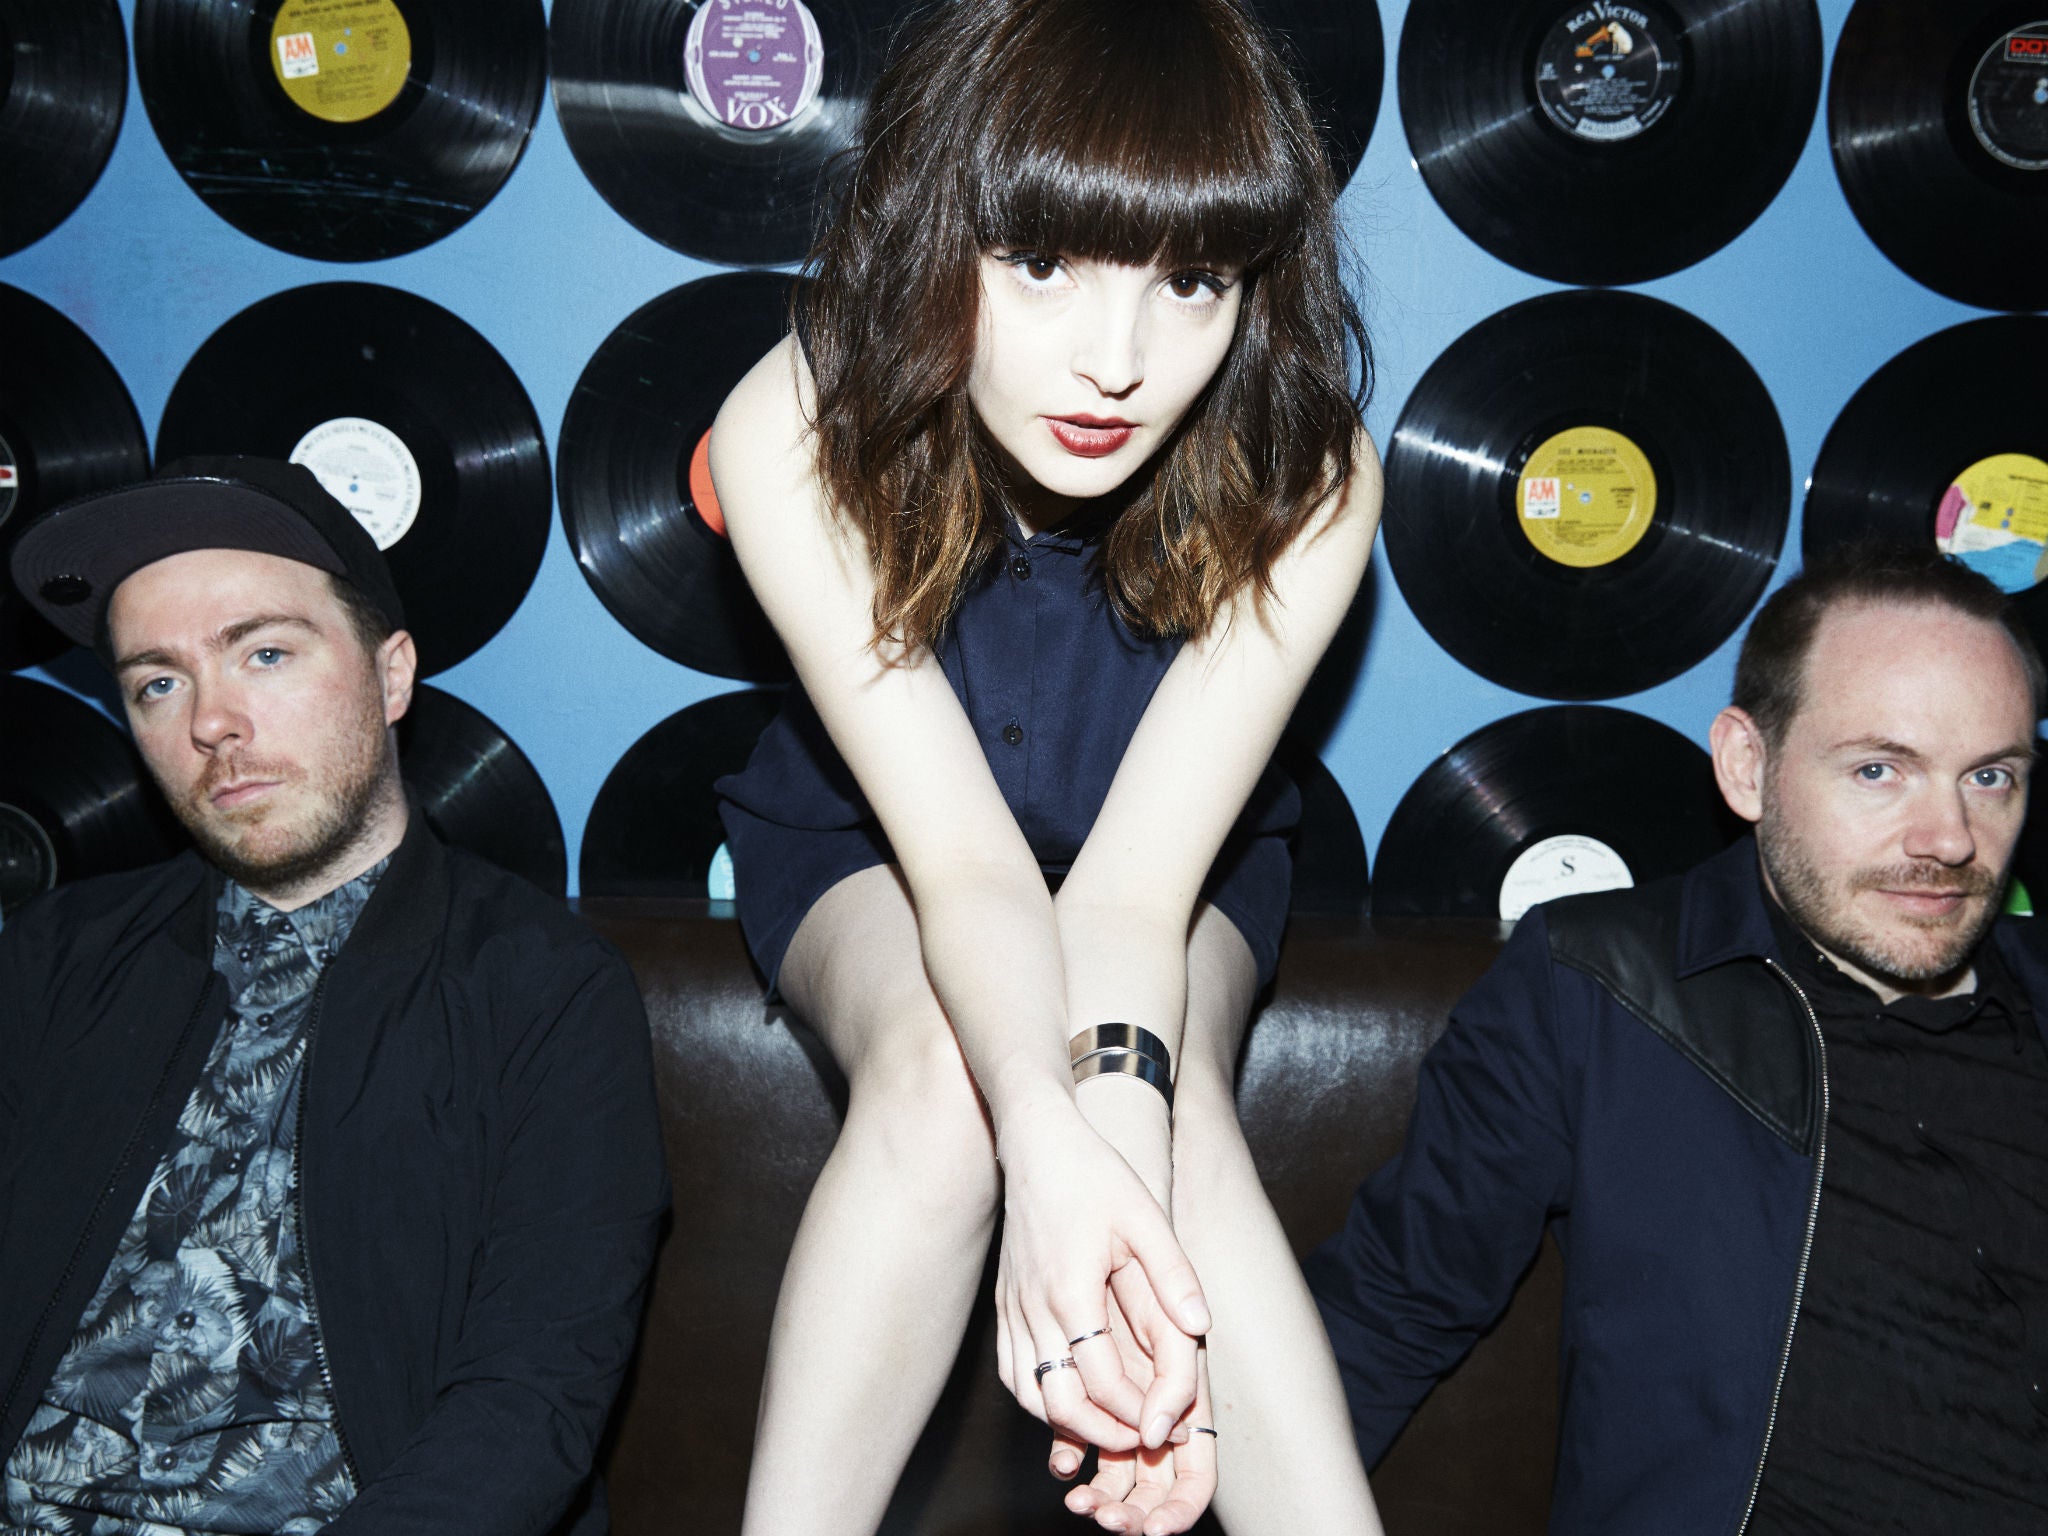 Chvrches play the Other Stage at Glastonbury on Saturday 25 June